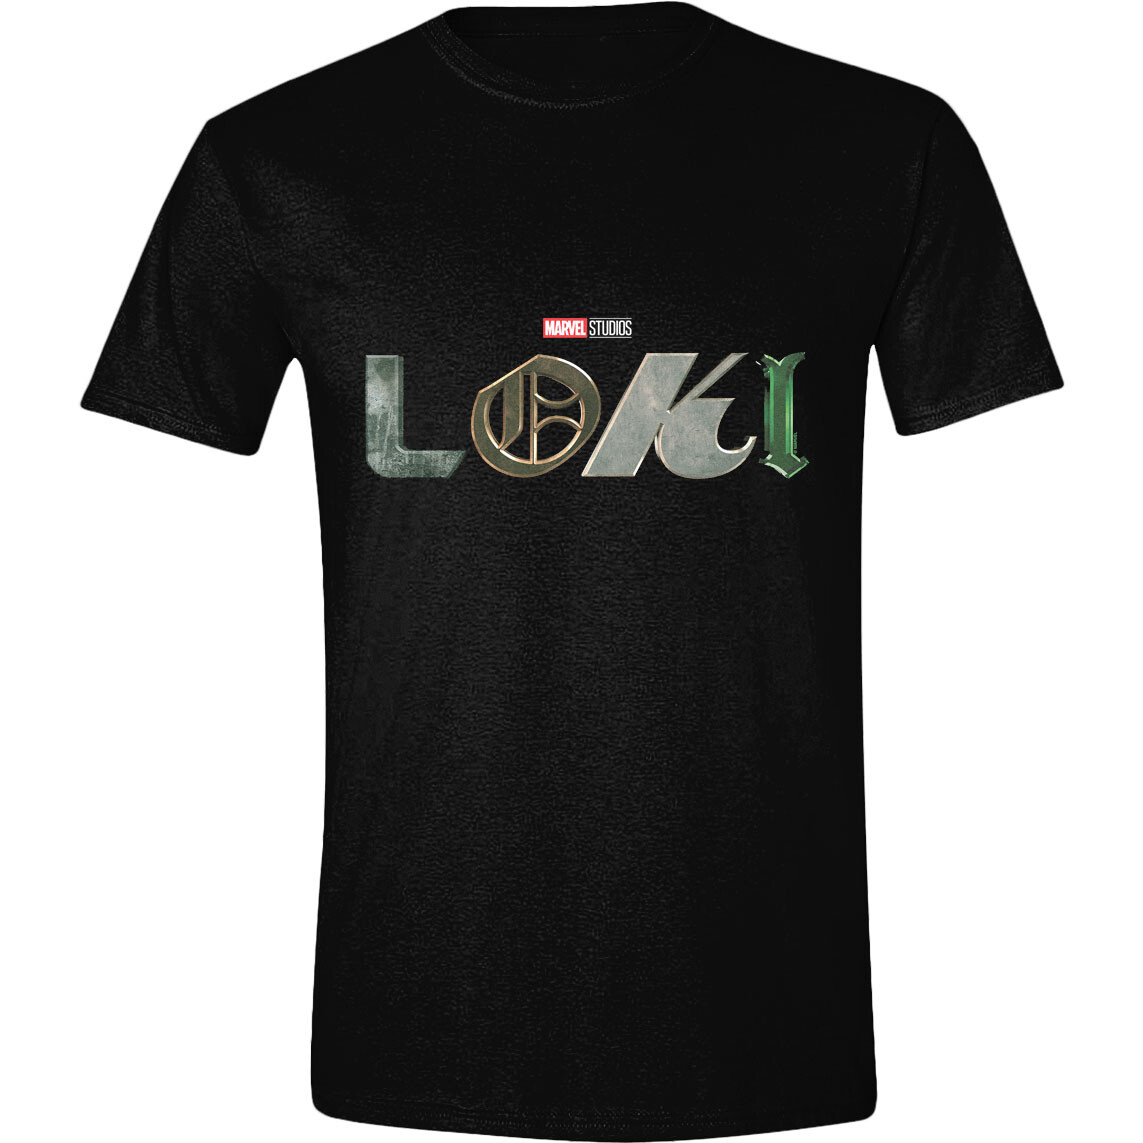 Loki - Logo | Clothes and accessories for merchandise fans